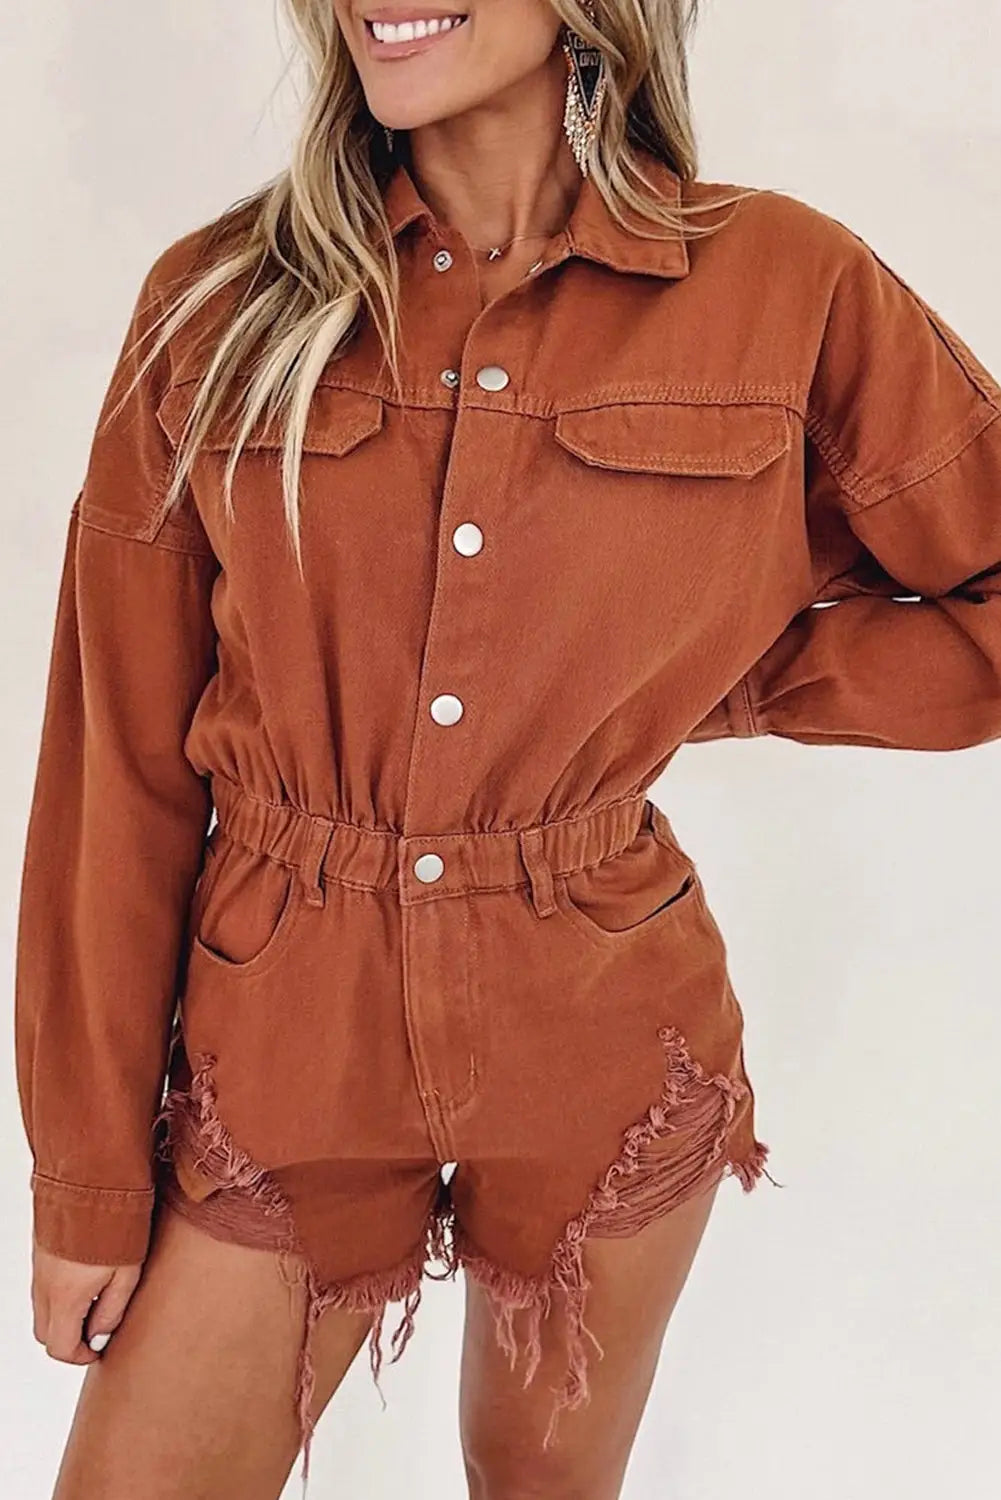 Gold flame long sleeve snap buttons distressed denim romper - l / 100% cotton - jumpsuits & rompers